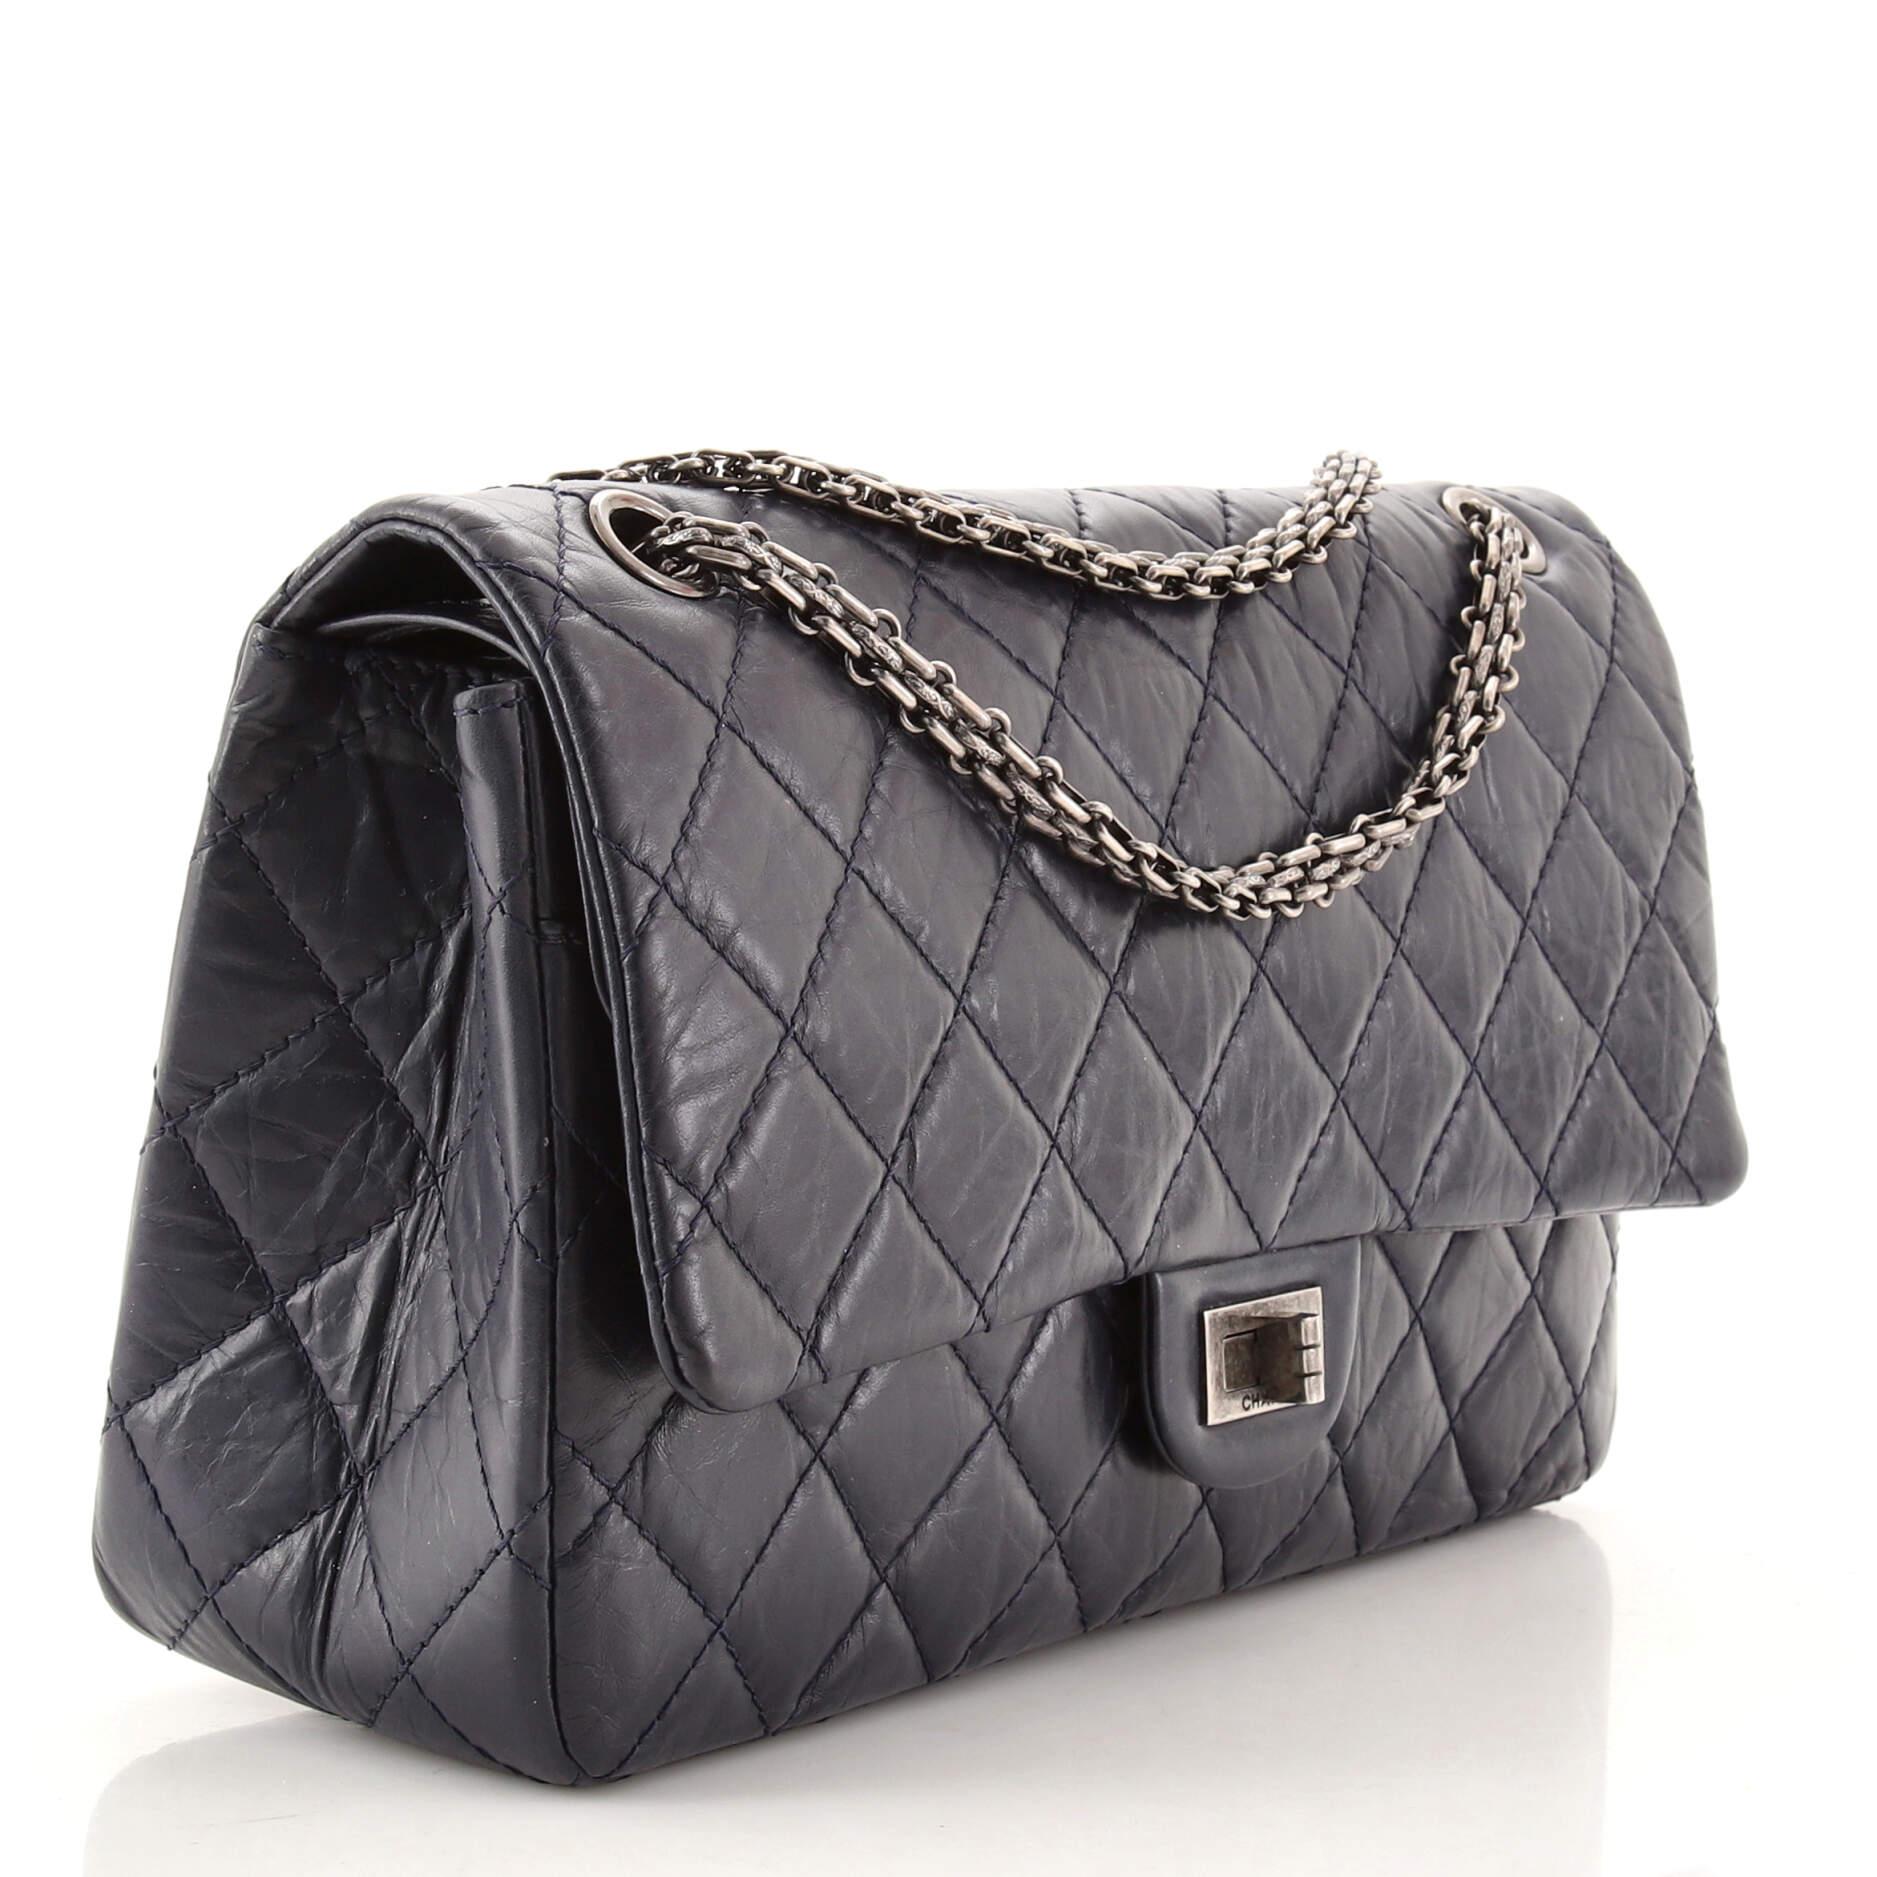 Black Chanel Reissue 2.55 Flap Bag Quilted Aged Calfskin 226